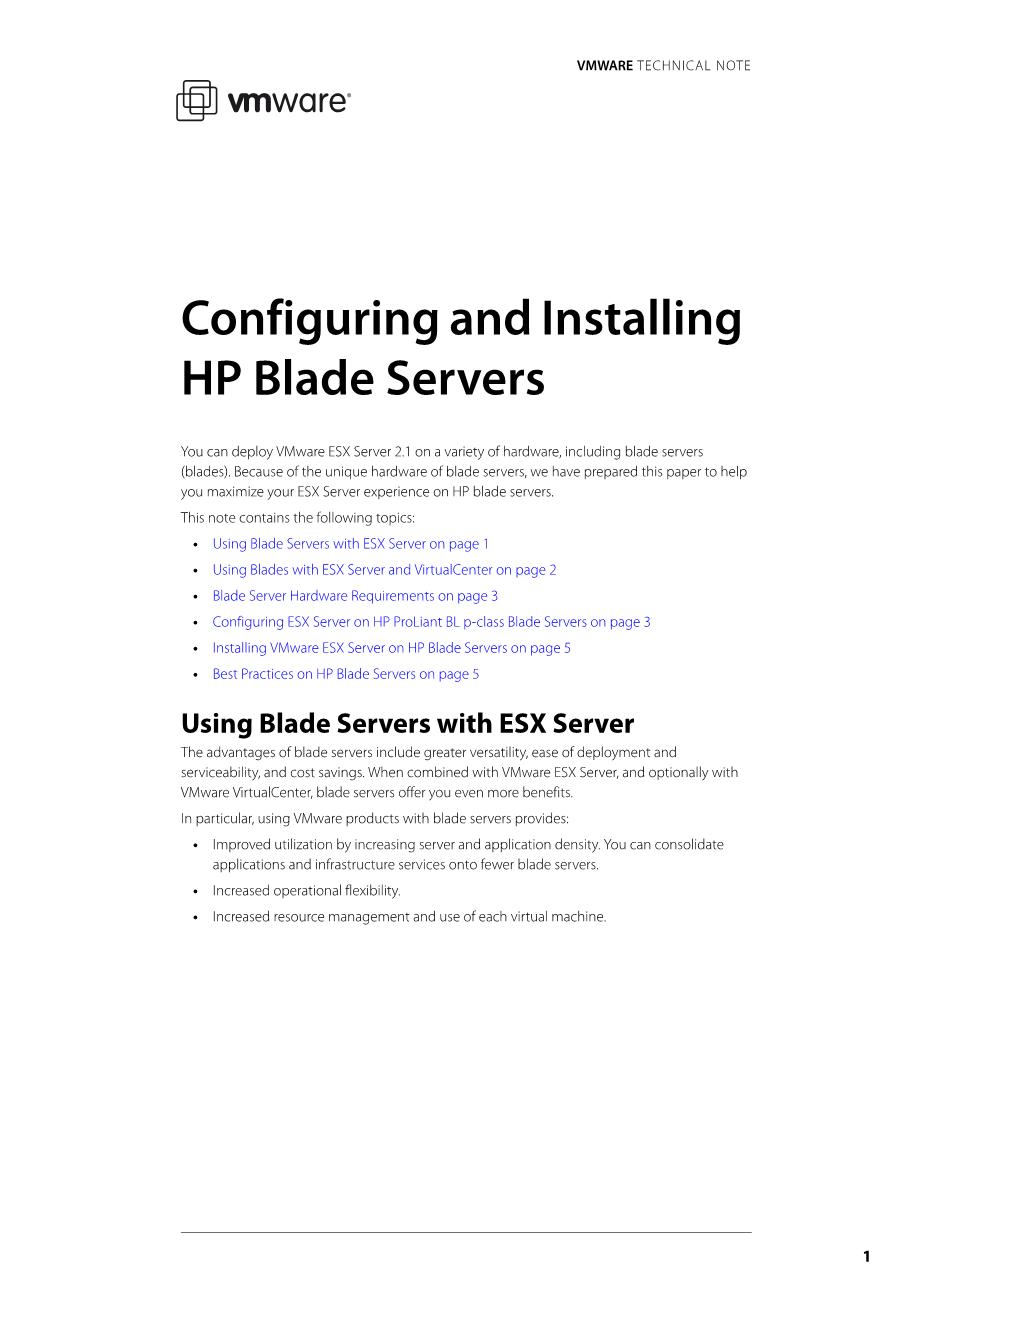 Configuring and Installing HP Blade Servers